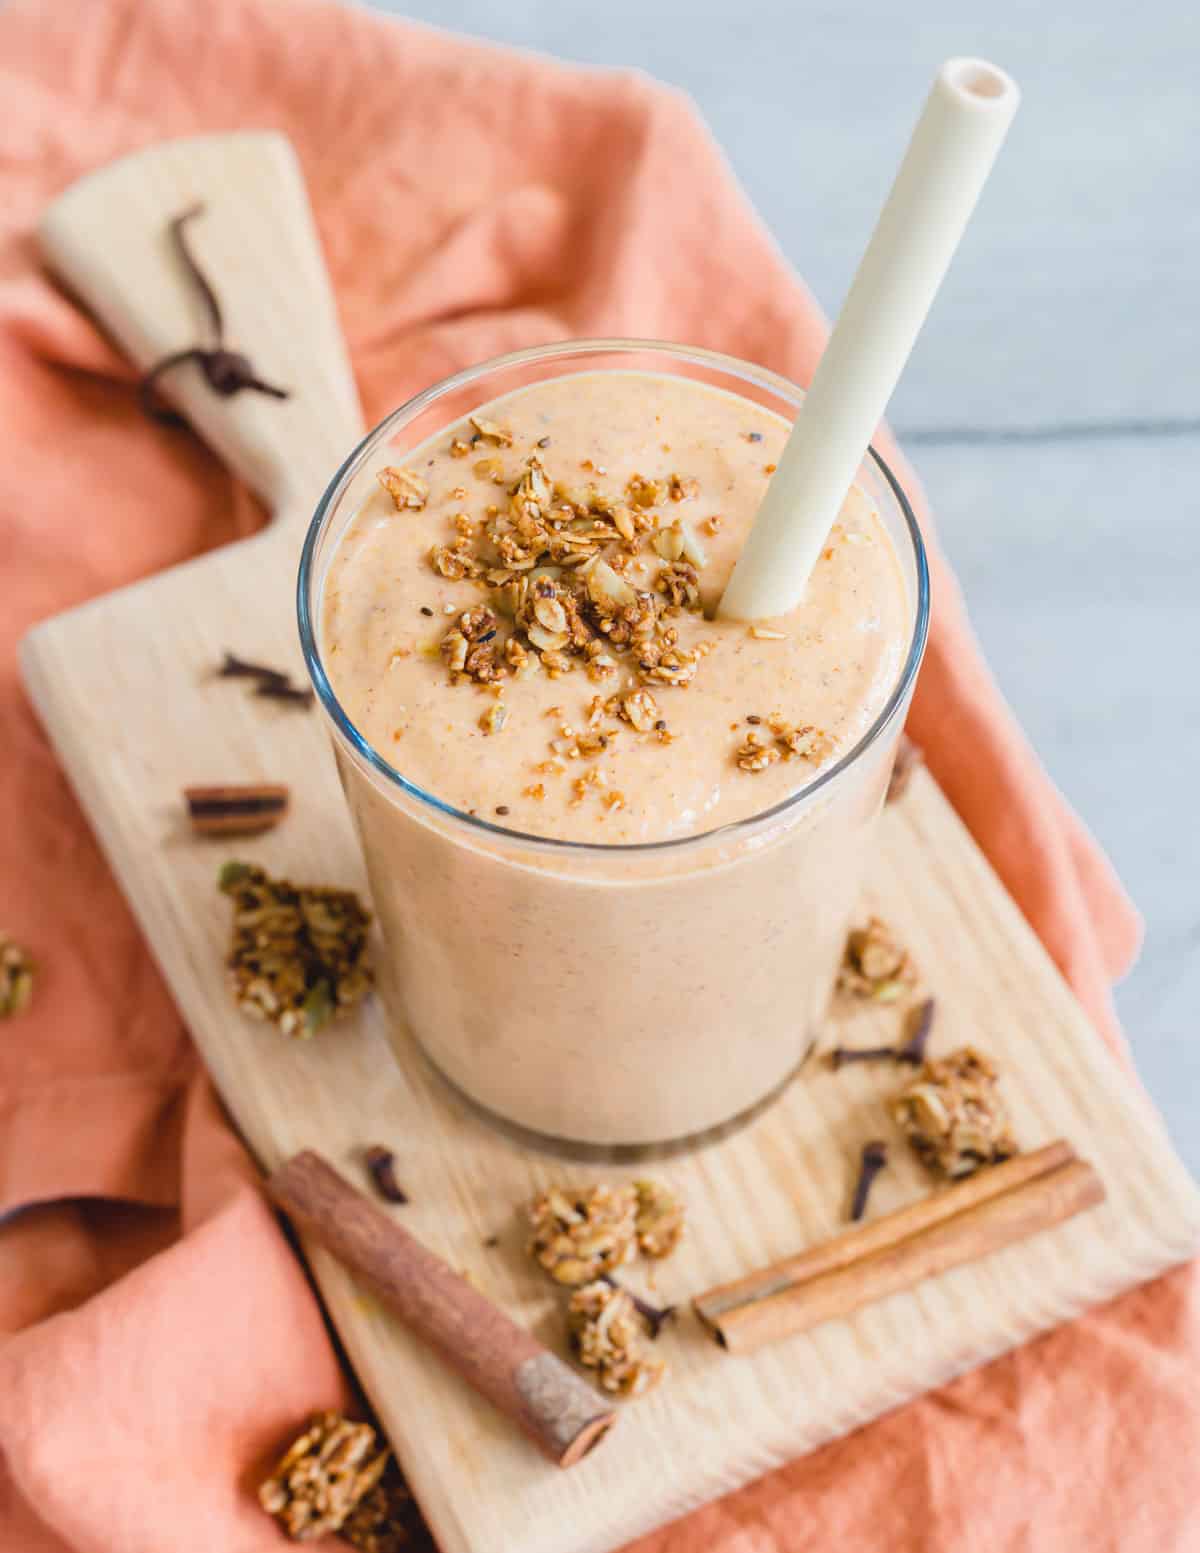 Butternut squash smoothie in a glass with a wooden straw and granola sprinkled on top.